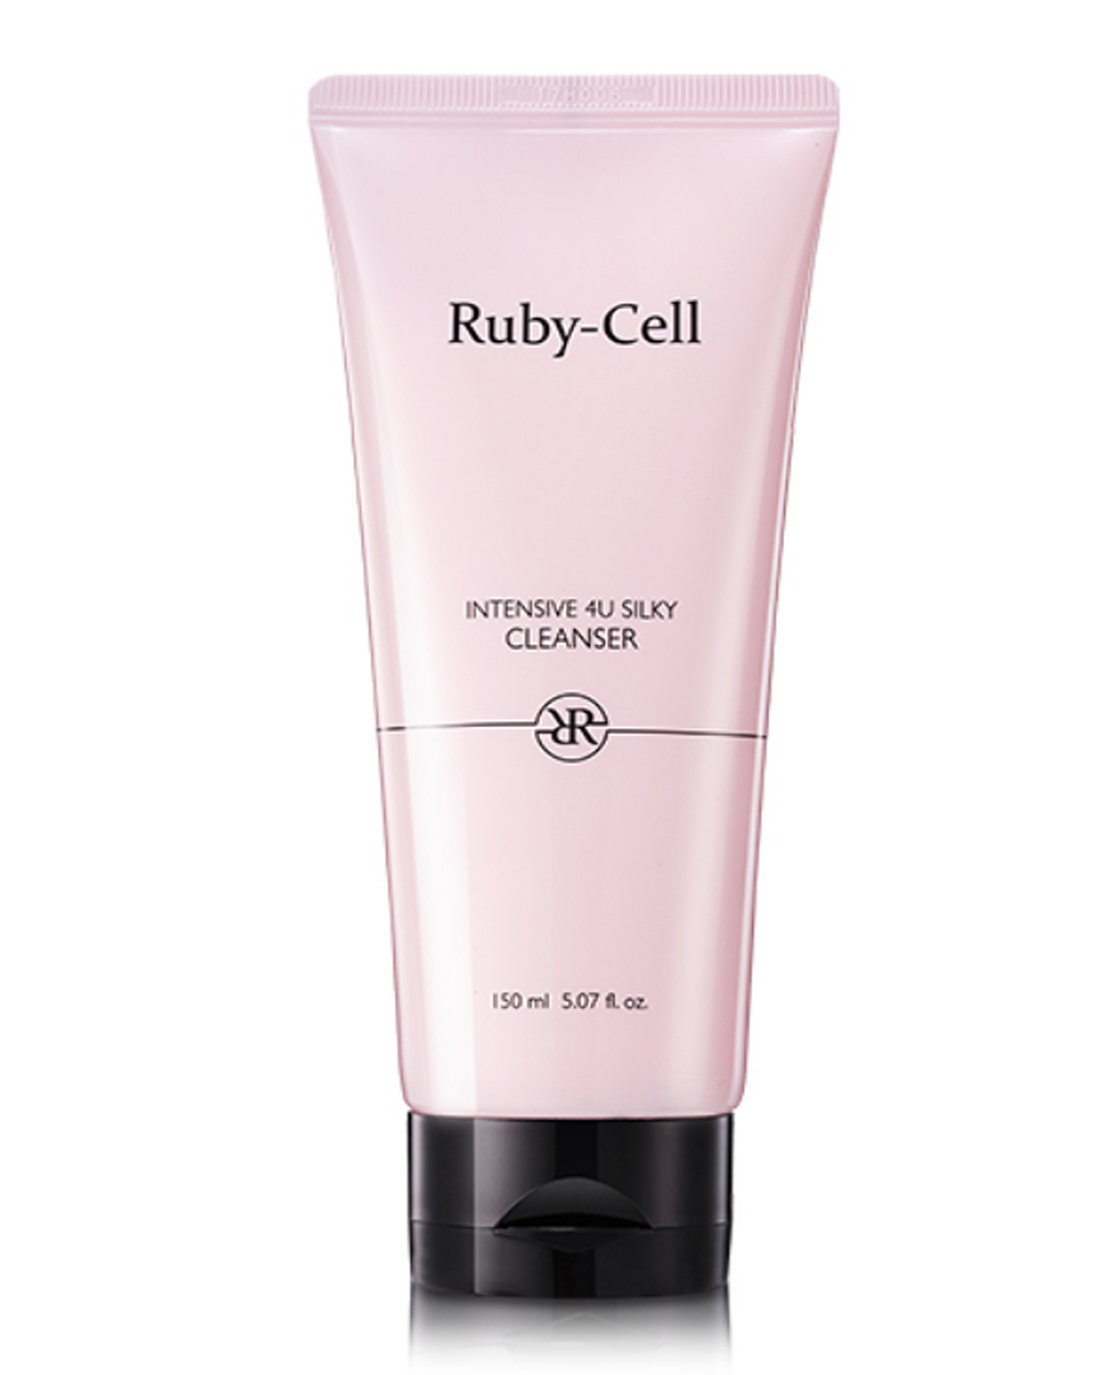 Ruby-Cell Intensive 4U Silky Cleanser